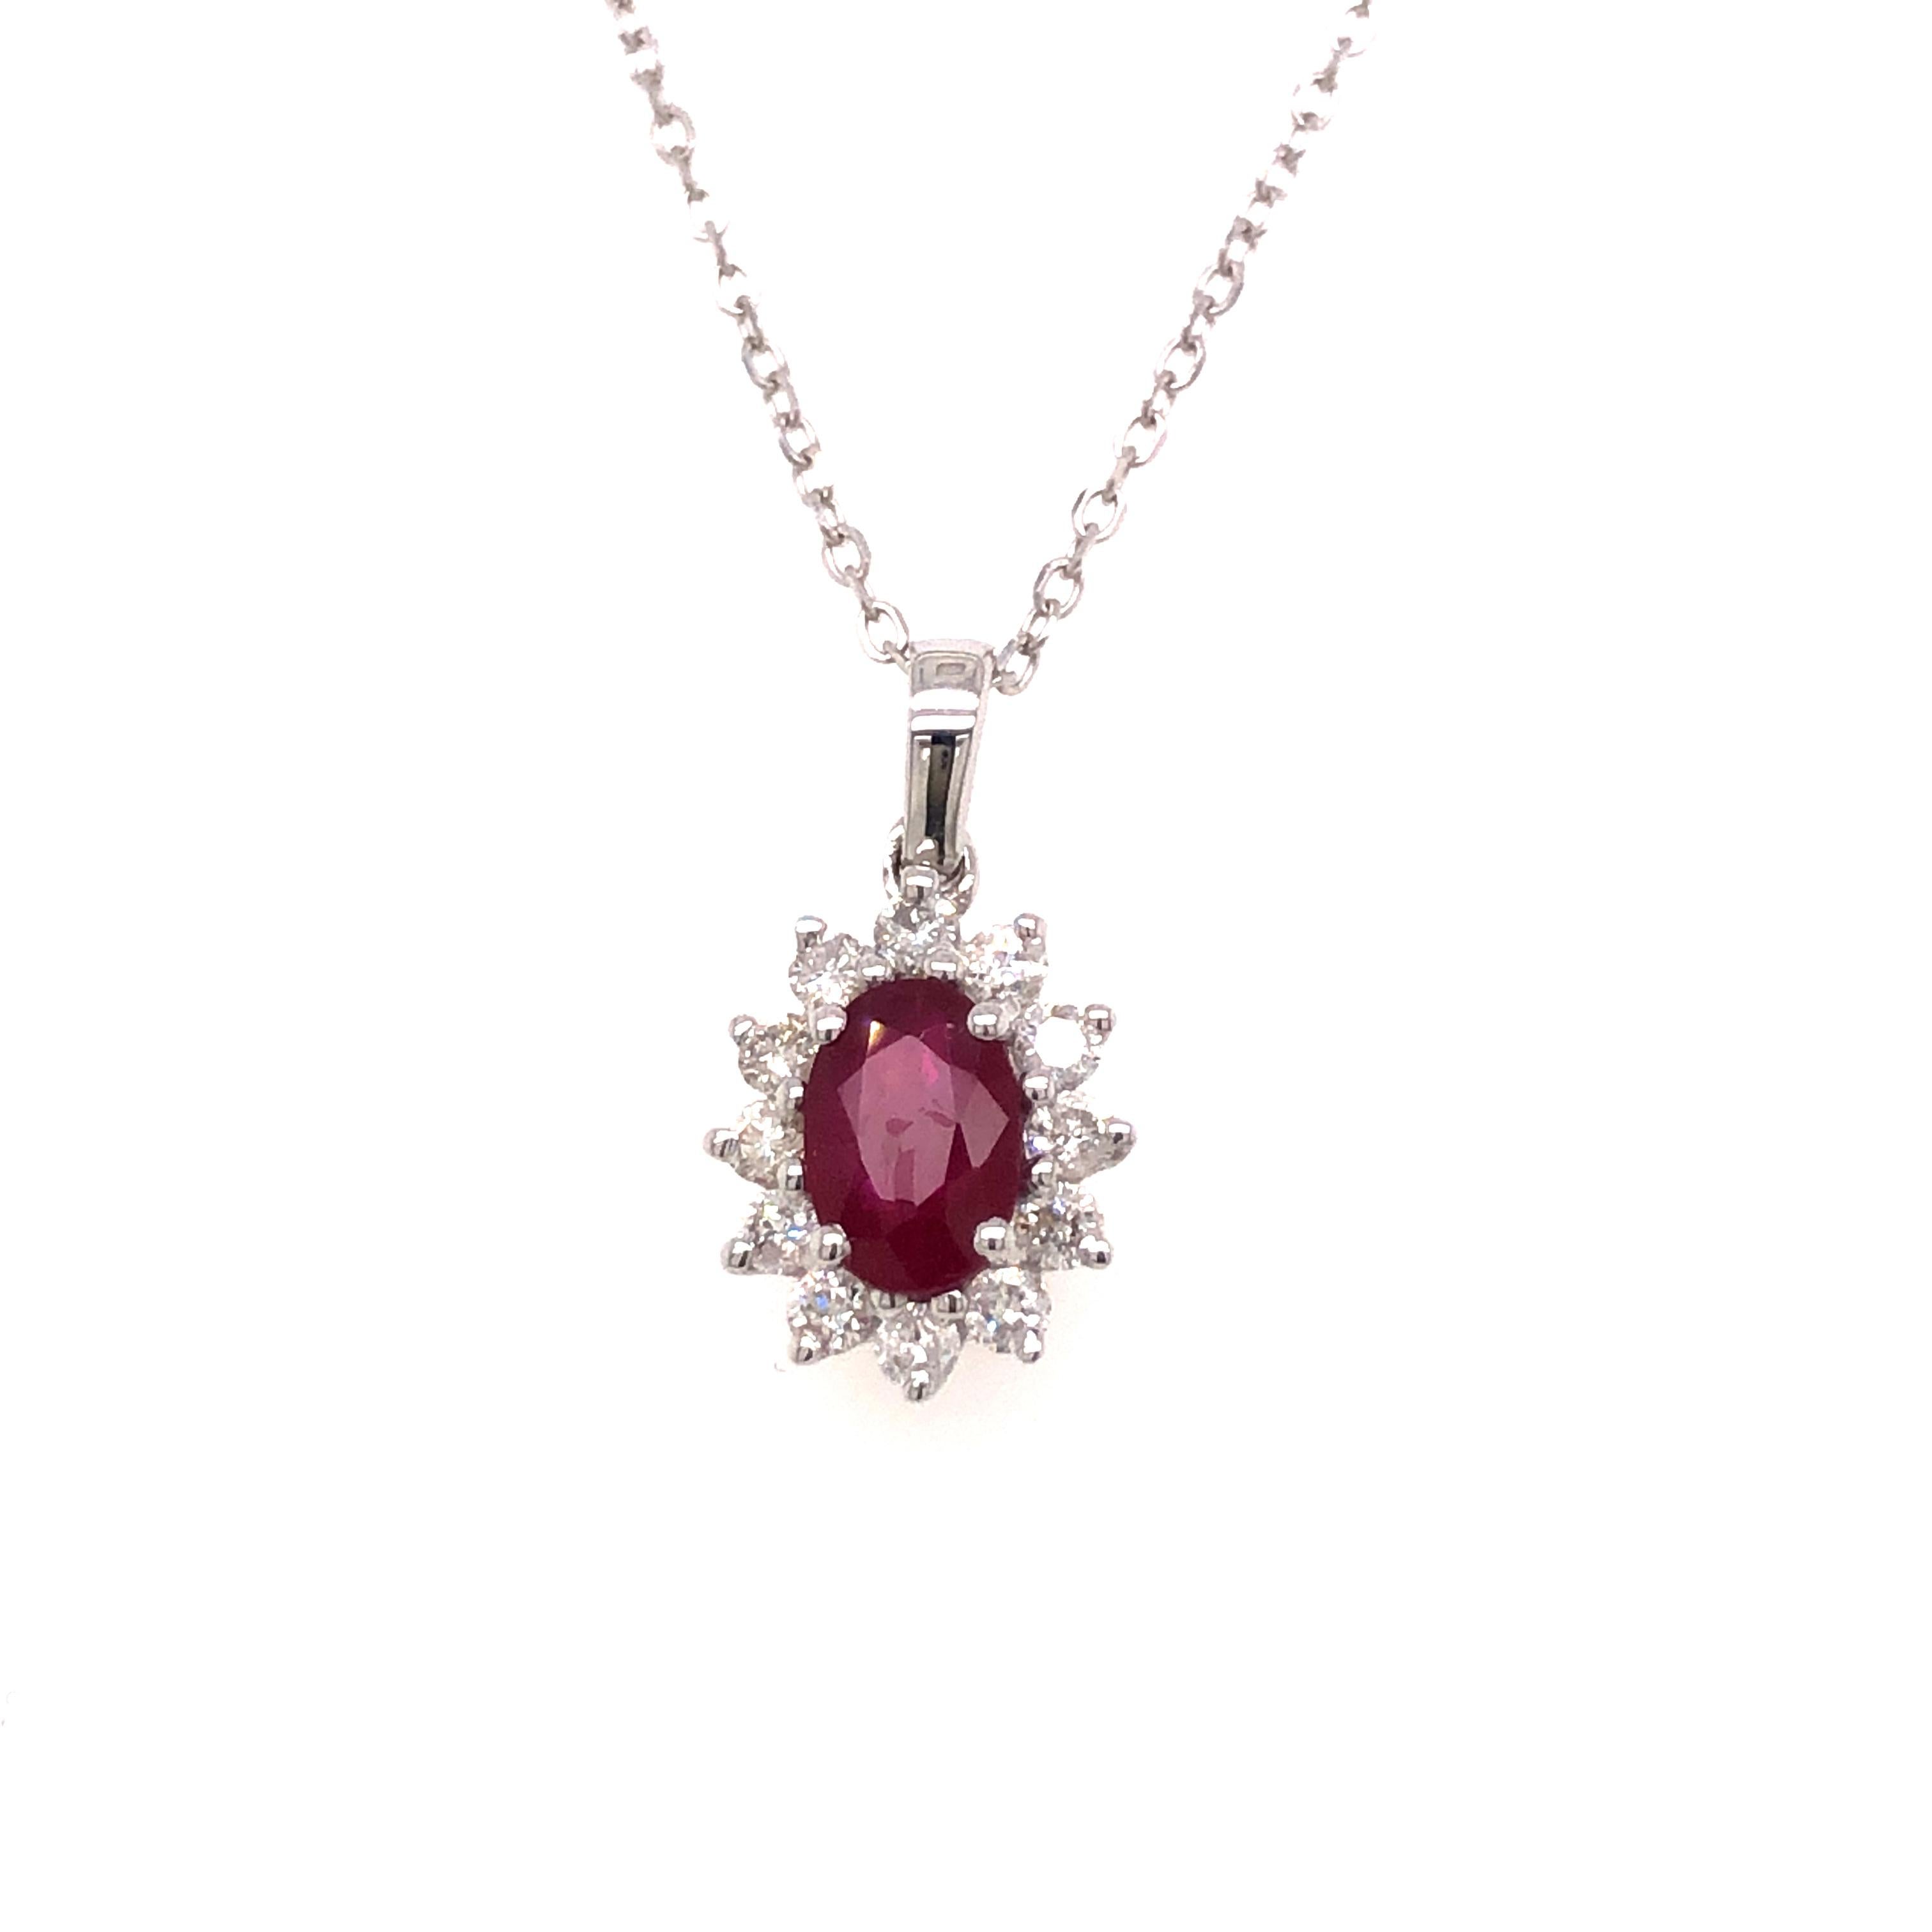 Ruby Cluster Pendant, with an oval ruby in the centre surrounded by 12 white stunning diamonds weighing a total 0.93 carat (Ruby & Diamond) of which, diamond total 0.23 carat color G/H clarity VS/SI, the ruby weighs 0.70 carat beautifully crafted in